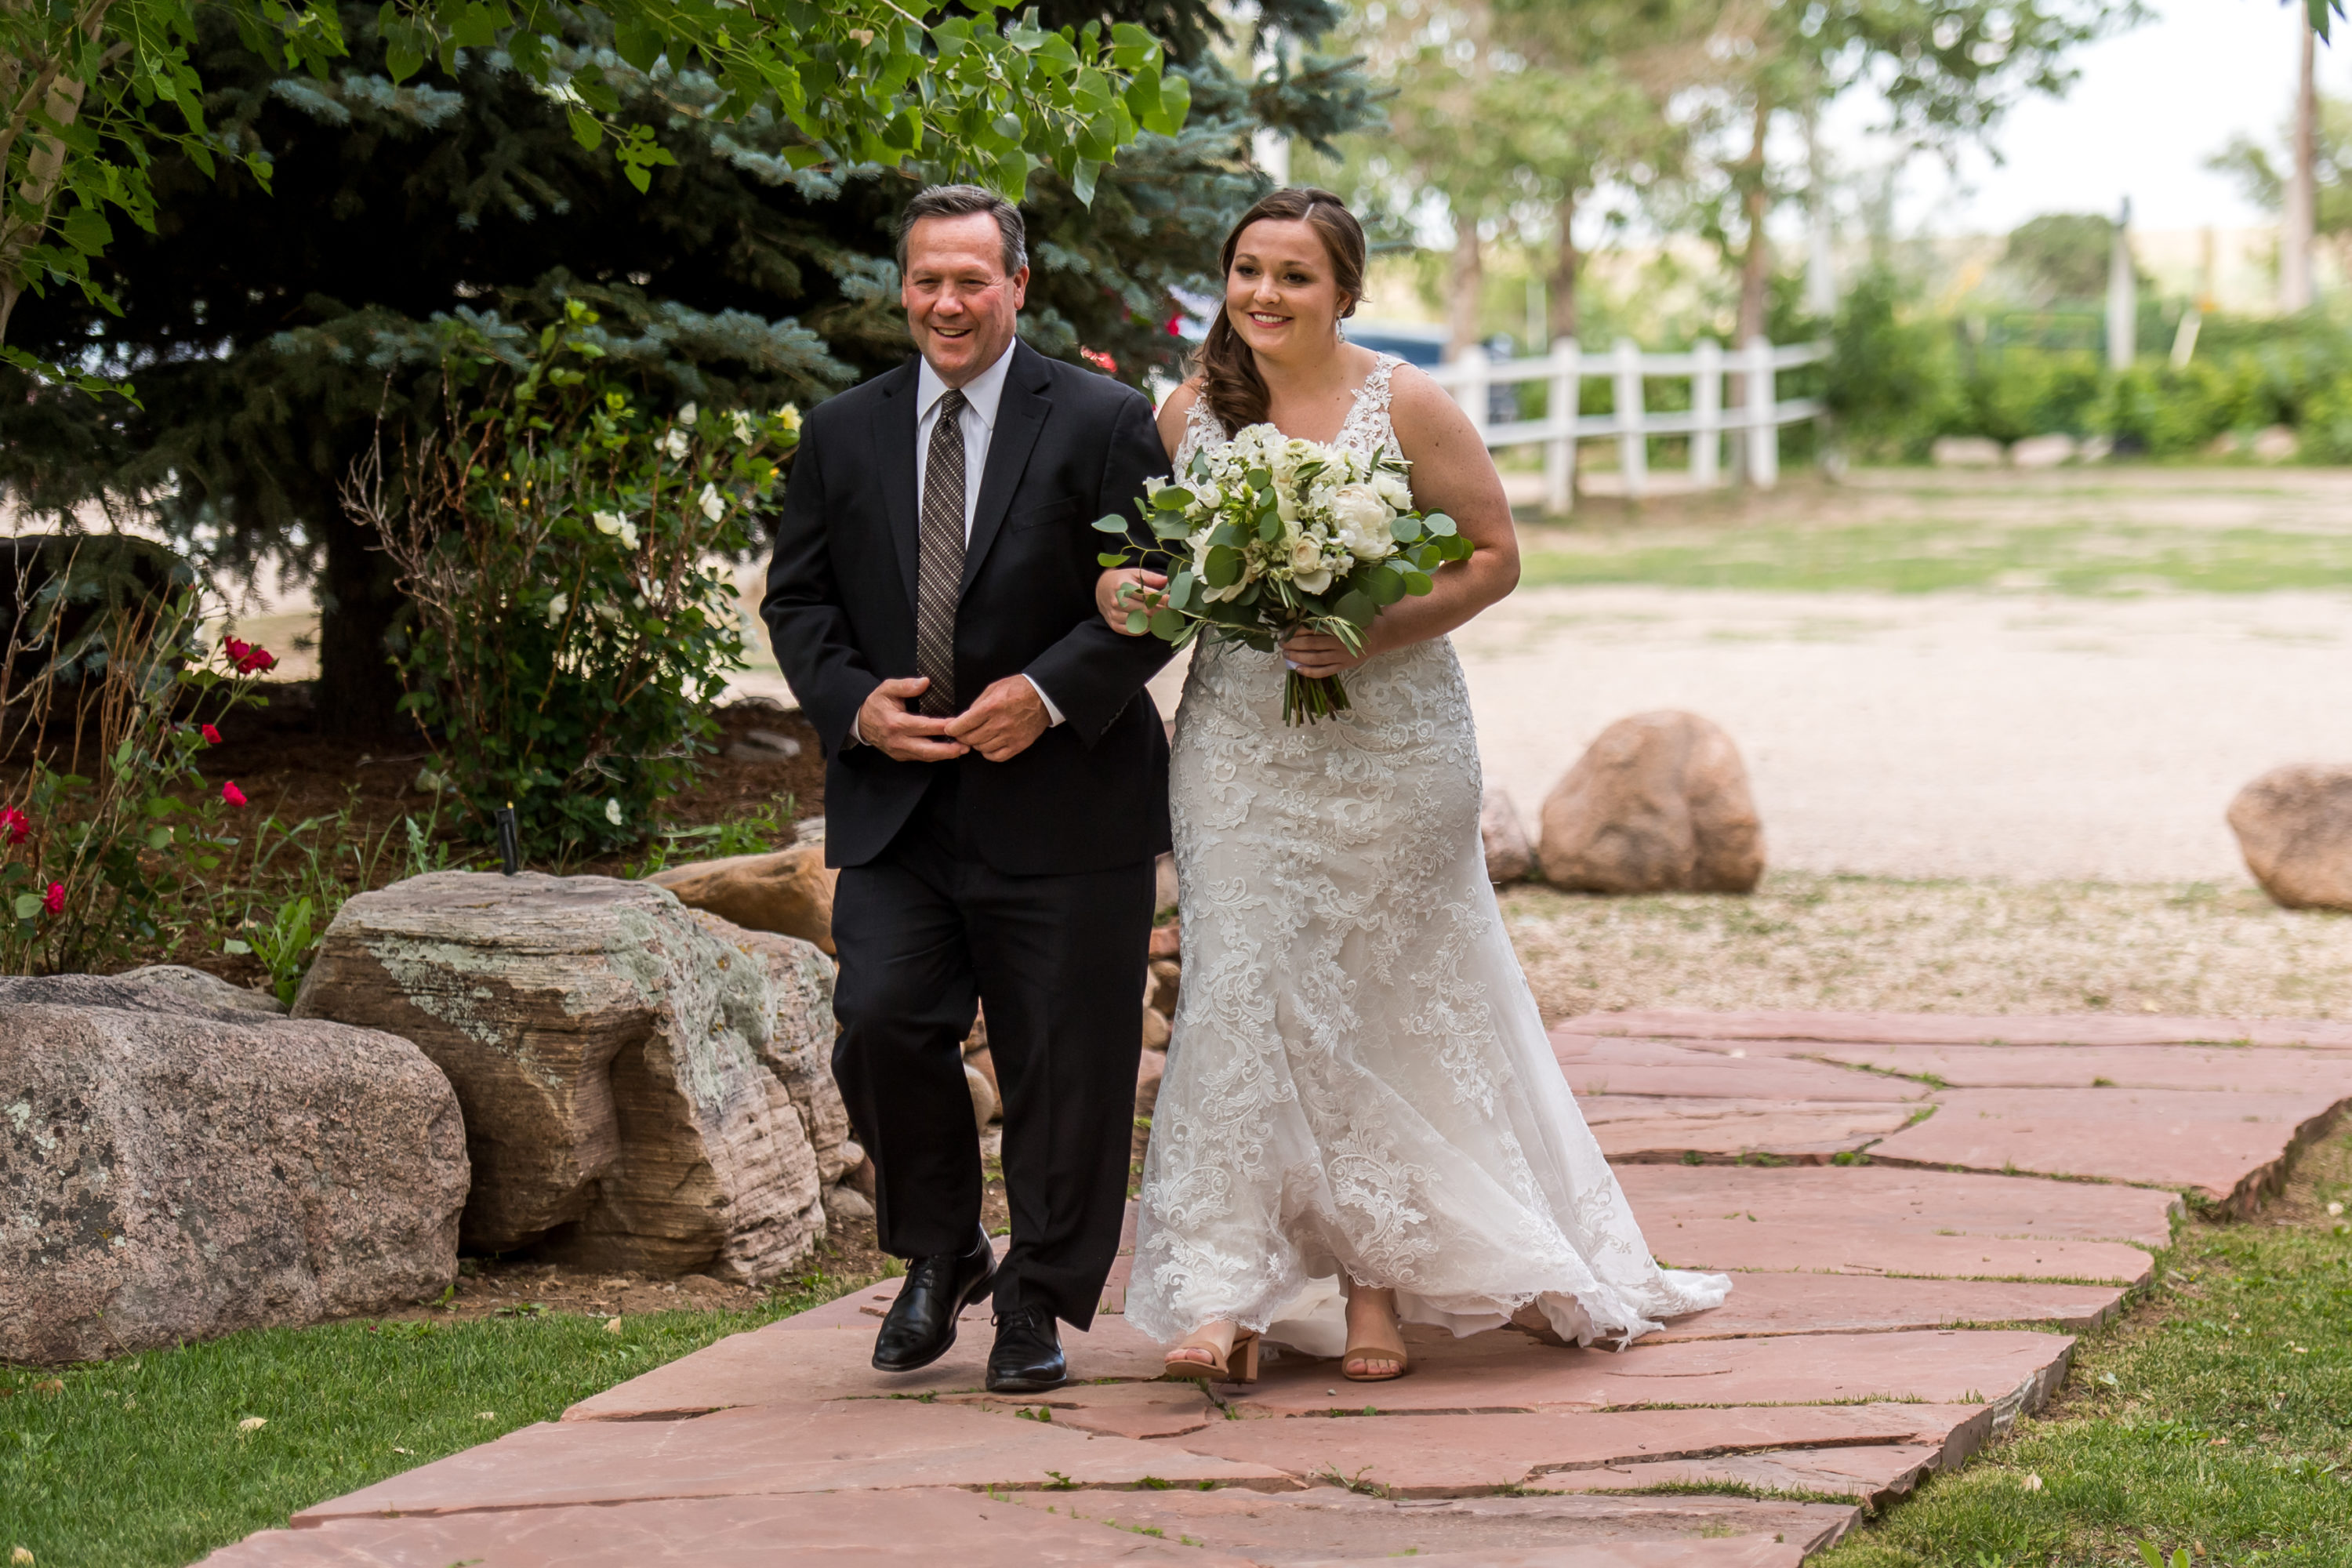 The bride walks down the aisle with her father during a Greenbriar Inn wedding in Boulder, Colorado.